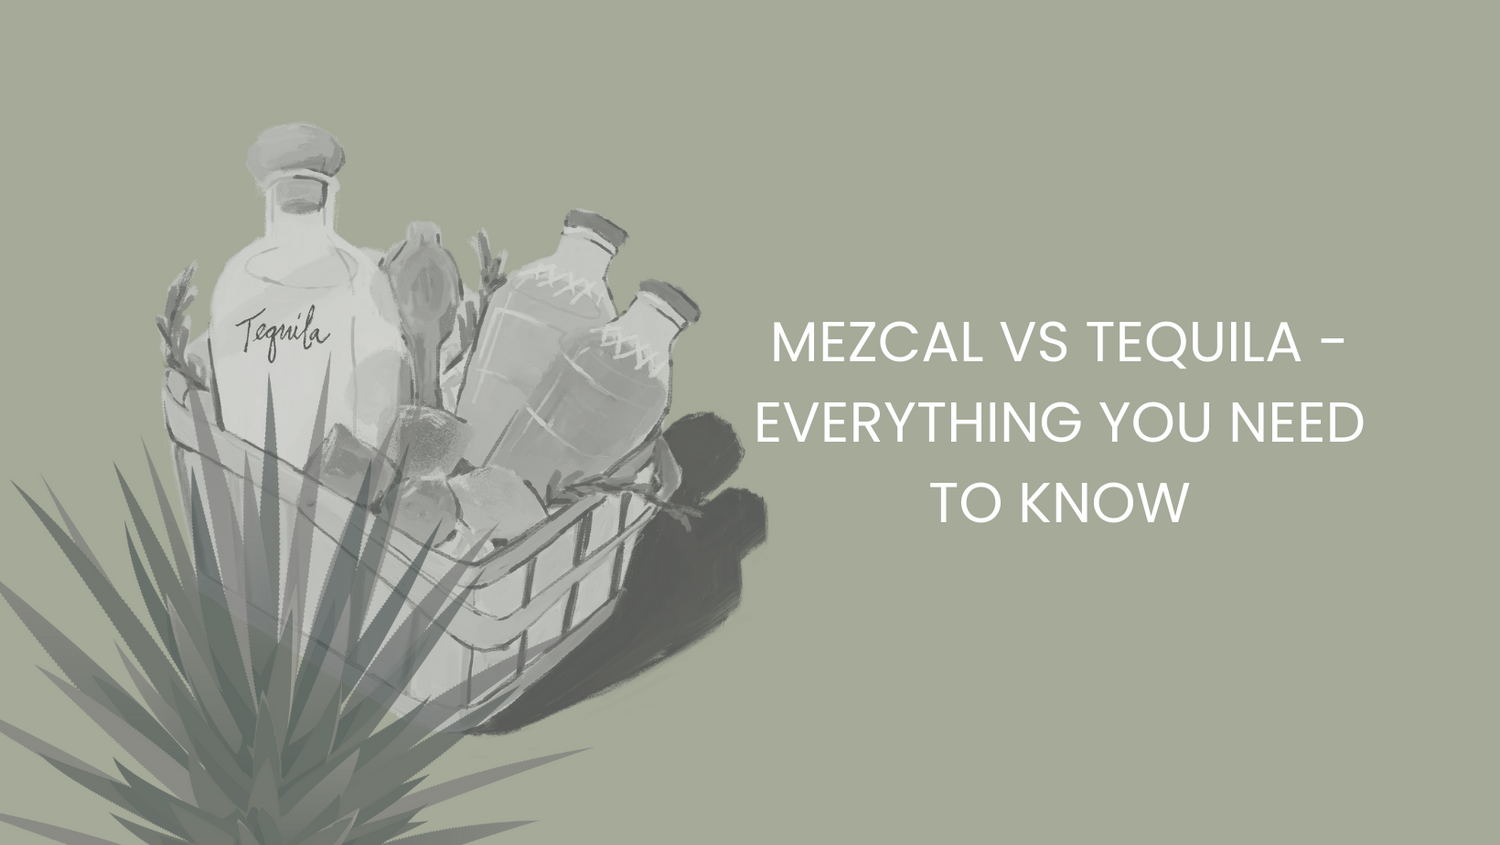 Mezcal vs Tequila - Everything you Need to Know